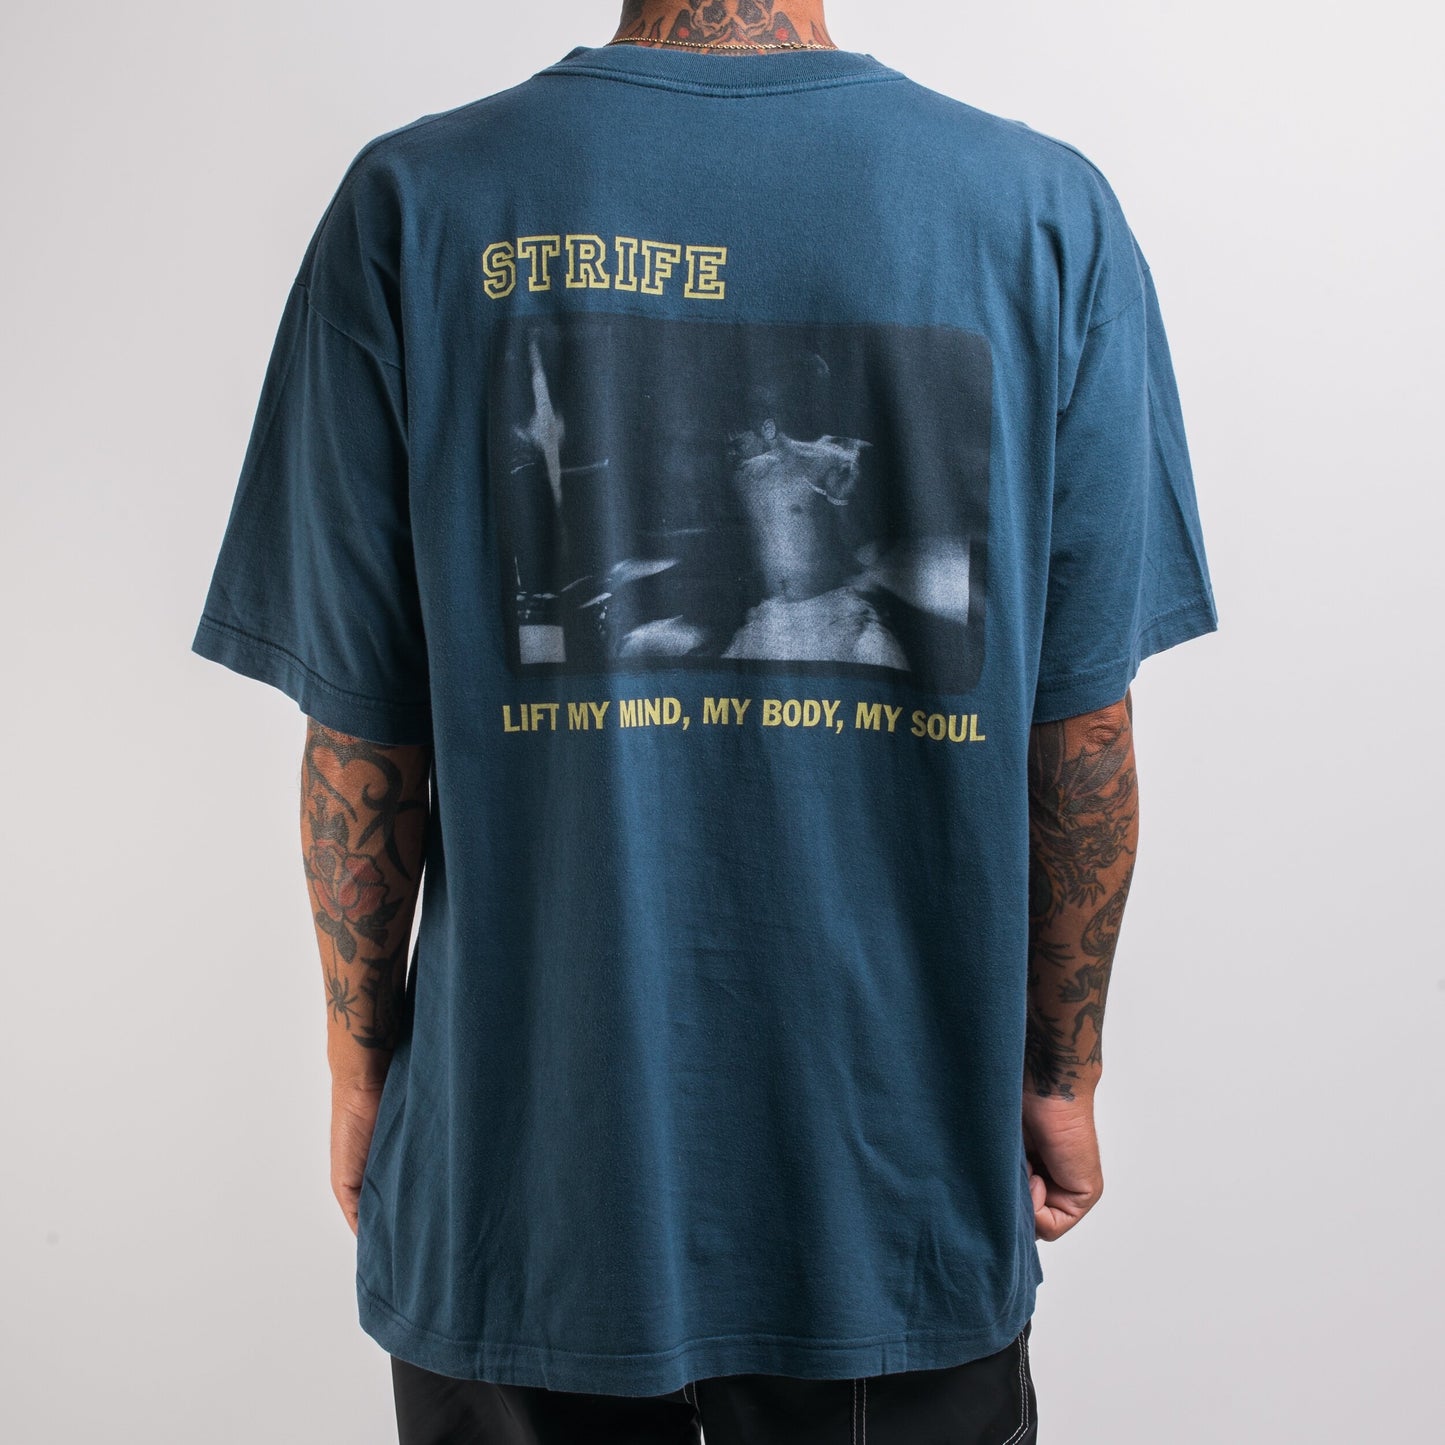 Vintage 90’s Strife One Truth T-Shirt